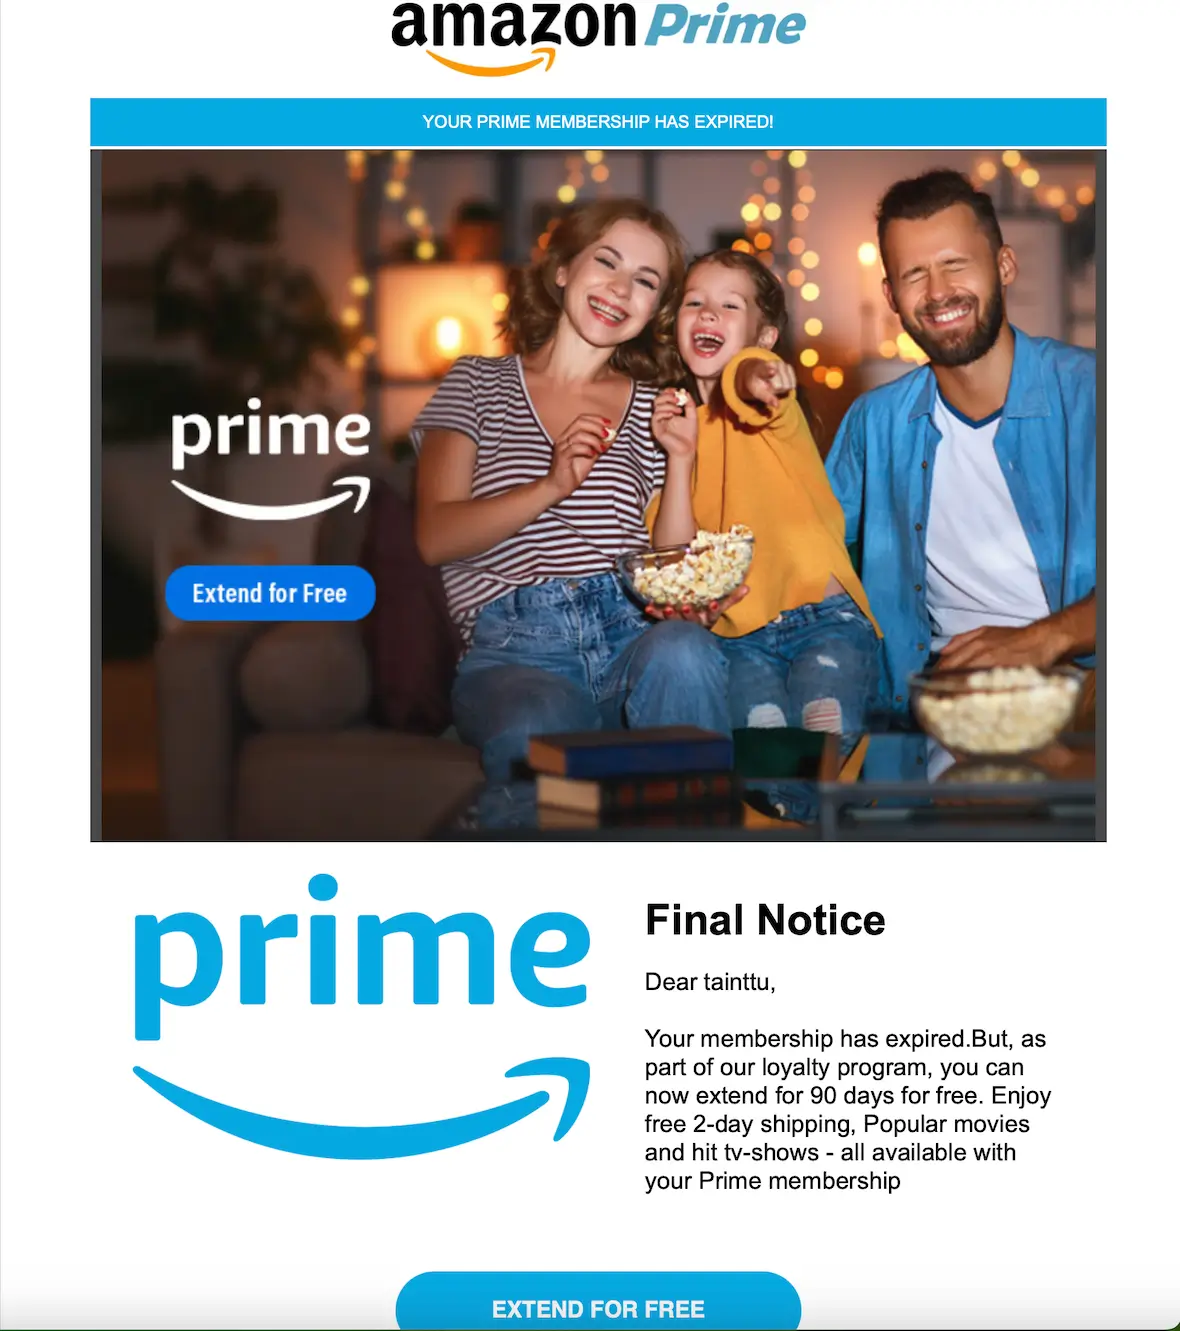 A screenshot of an example of an Amazon Prime scam.